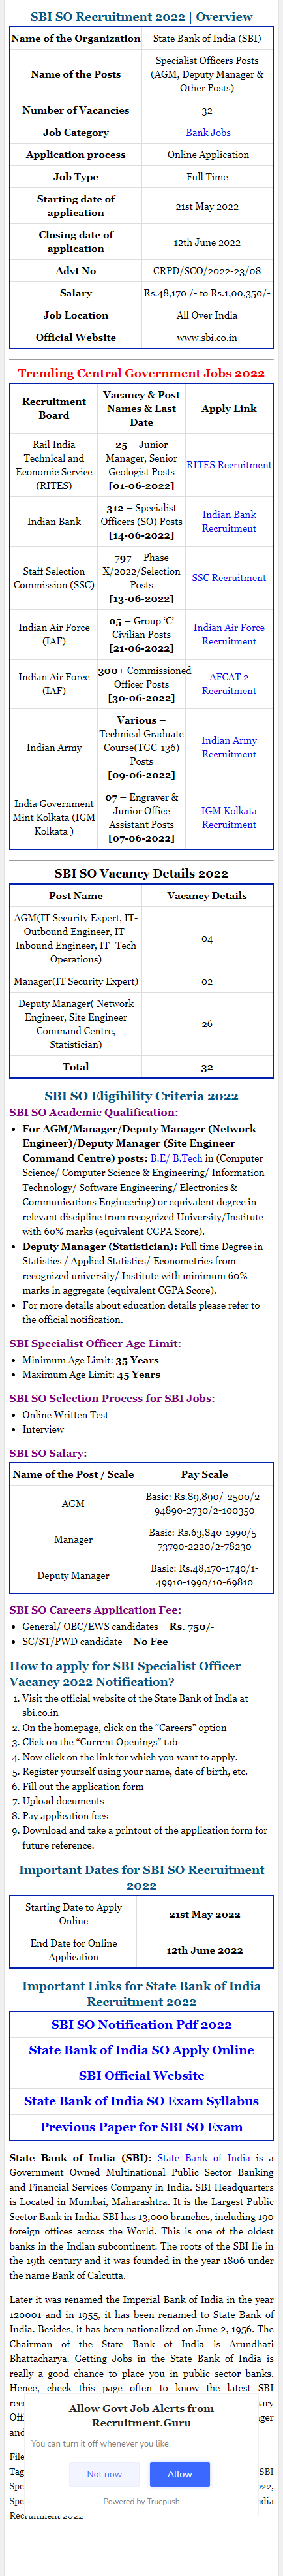 SBI SO Recruitment 2022 | Apply Online for 32 Specialist Officers (AGM & Other Posts)!!